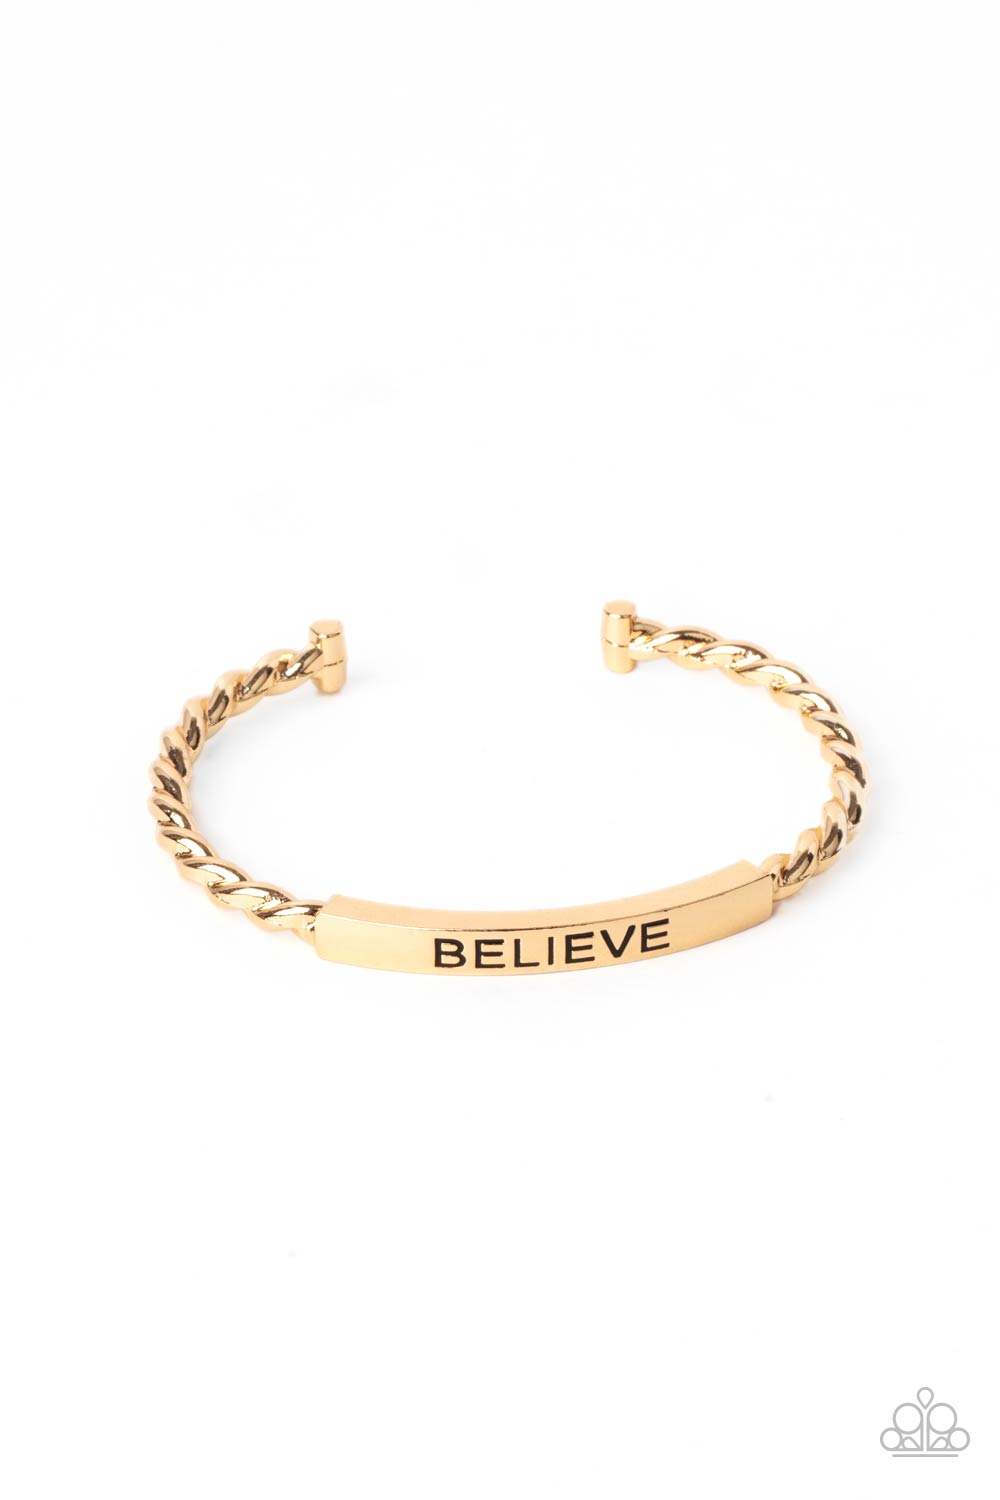 Keep Calm and Believe Gold Cuff Bracelet - Paparazzi Accessories  Twisted gold bars attach to a shiny gold plate stamped in the word, "BELIEVE," creating an inspiring cuff around the wrist.  All Paparazzi Accessories are lead free and nickel free!  Sold as one individual necklace.